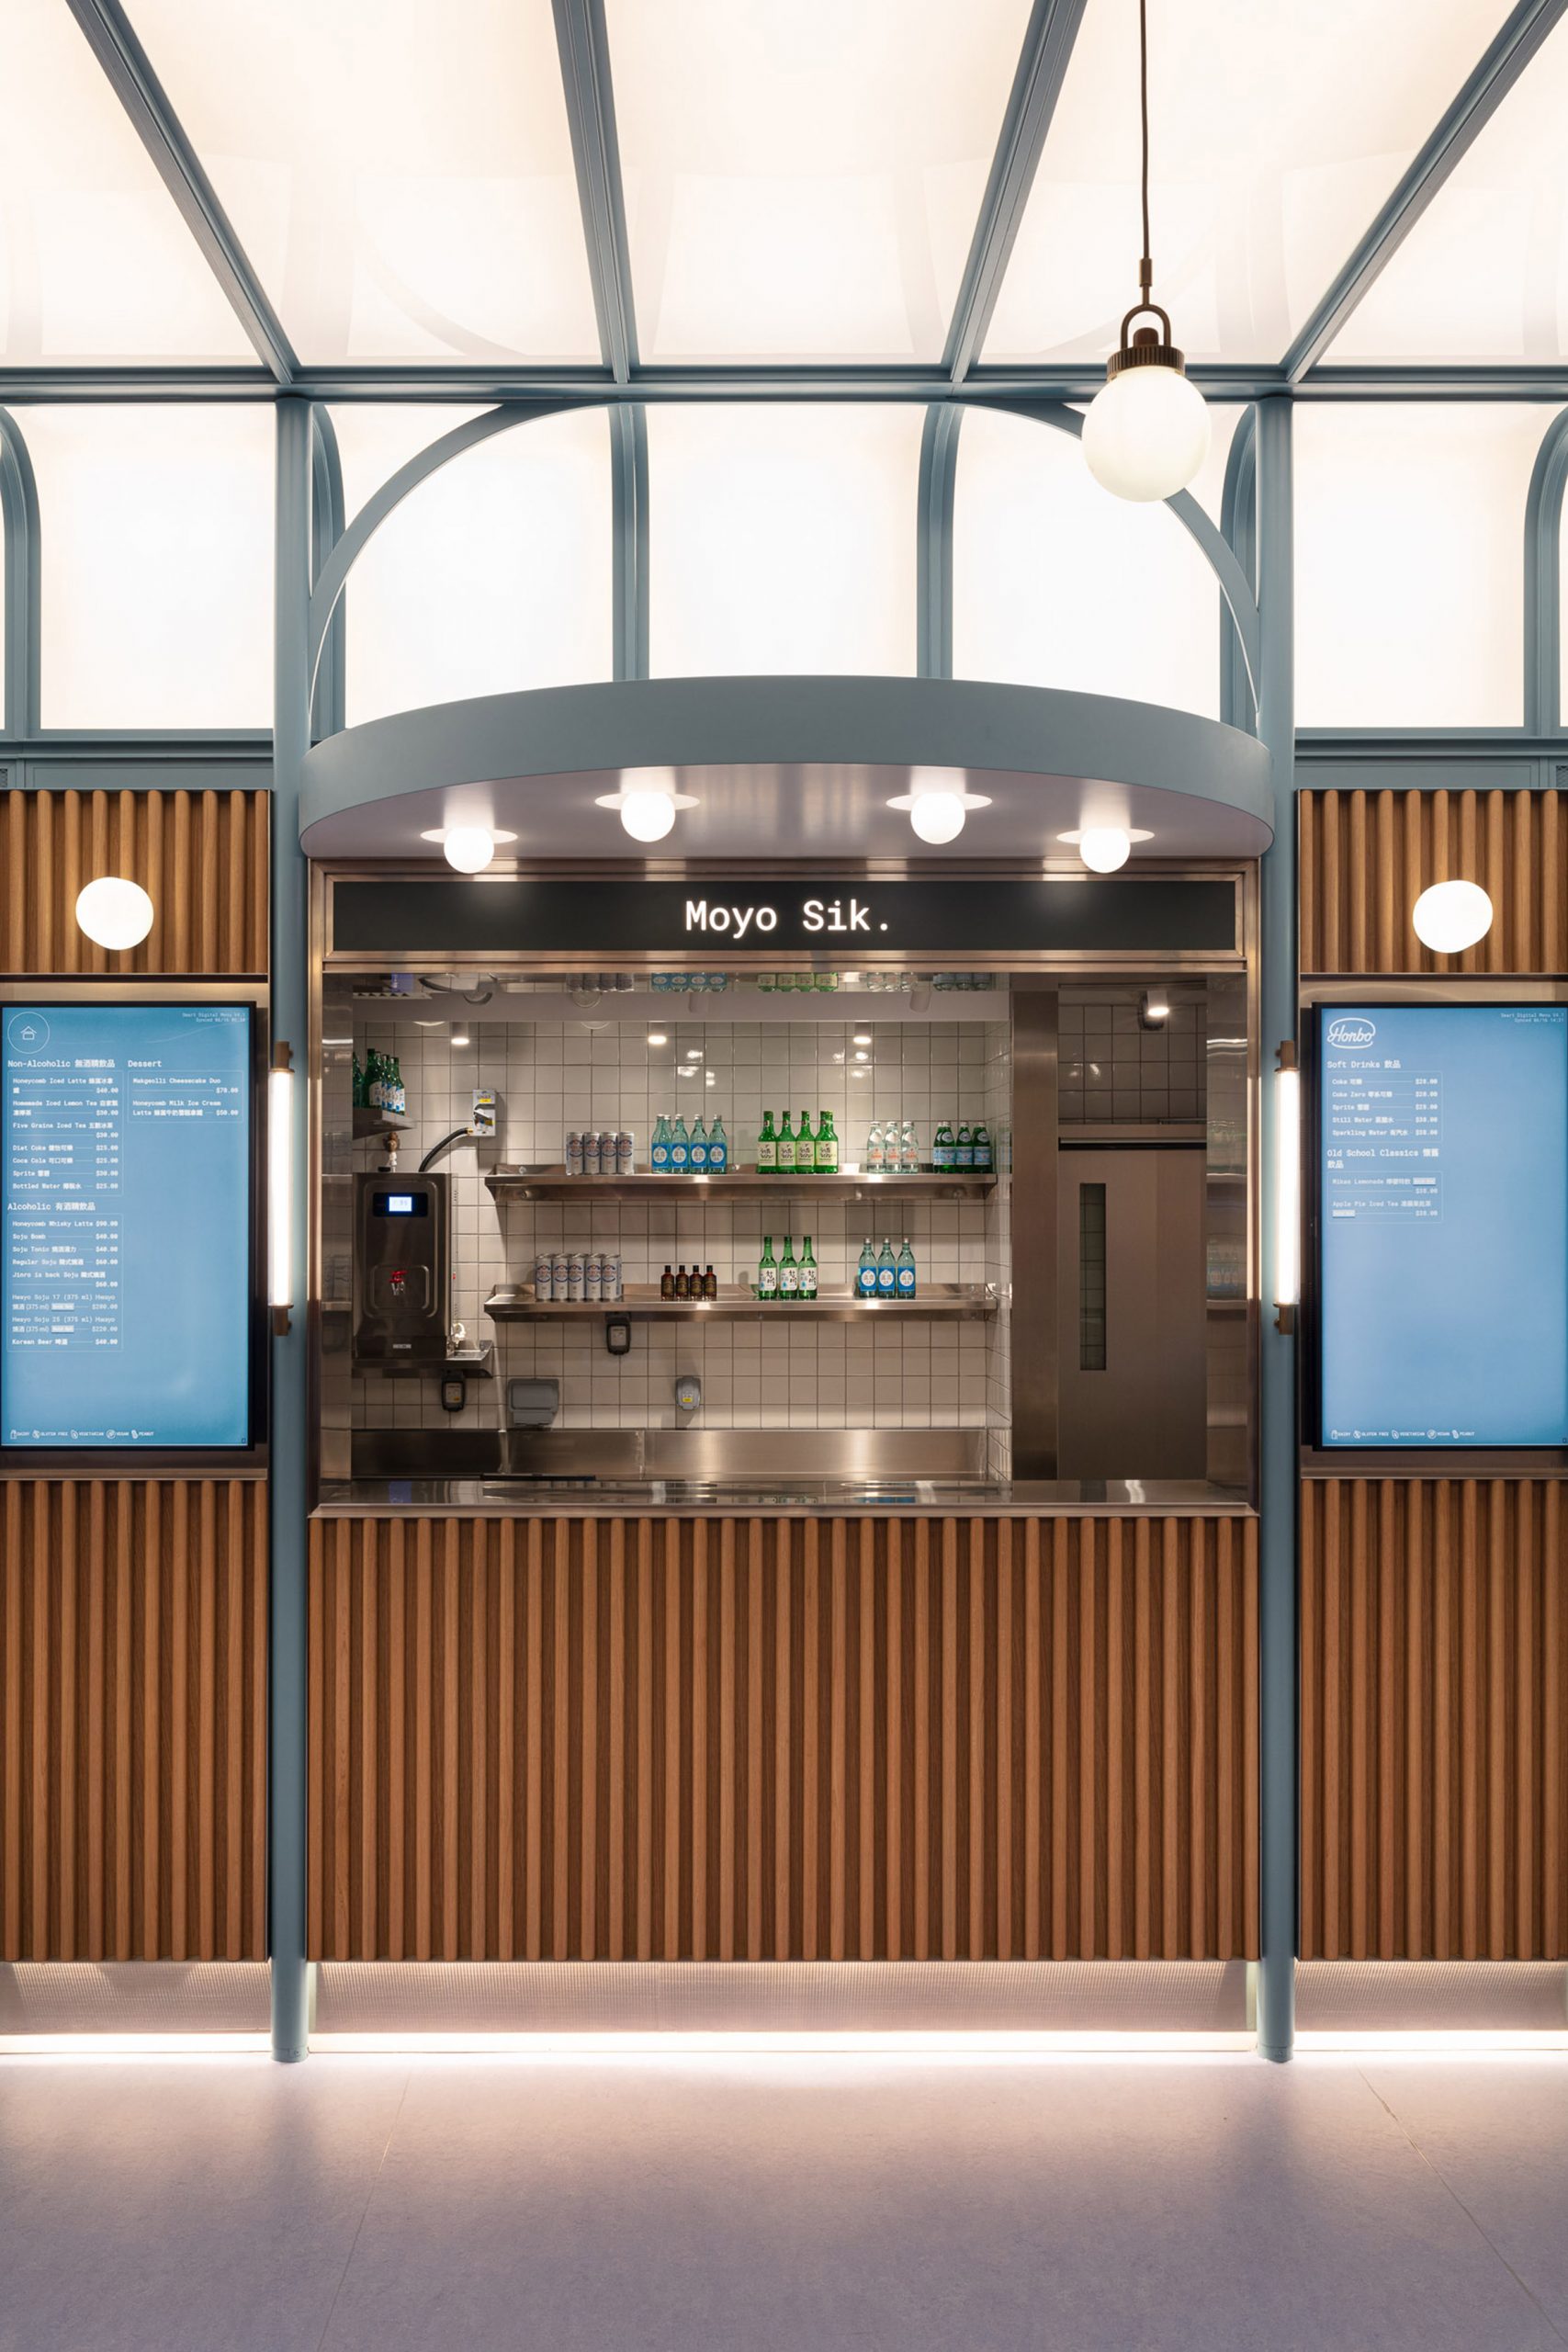 Basehall food hall in Hong Kong designed by Linehouse